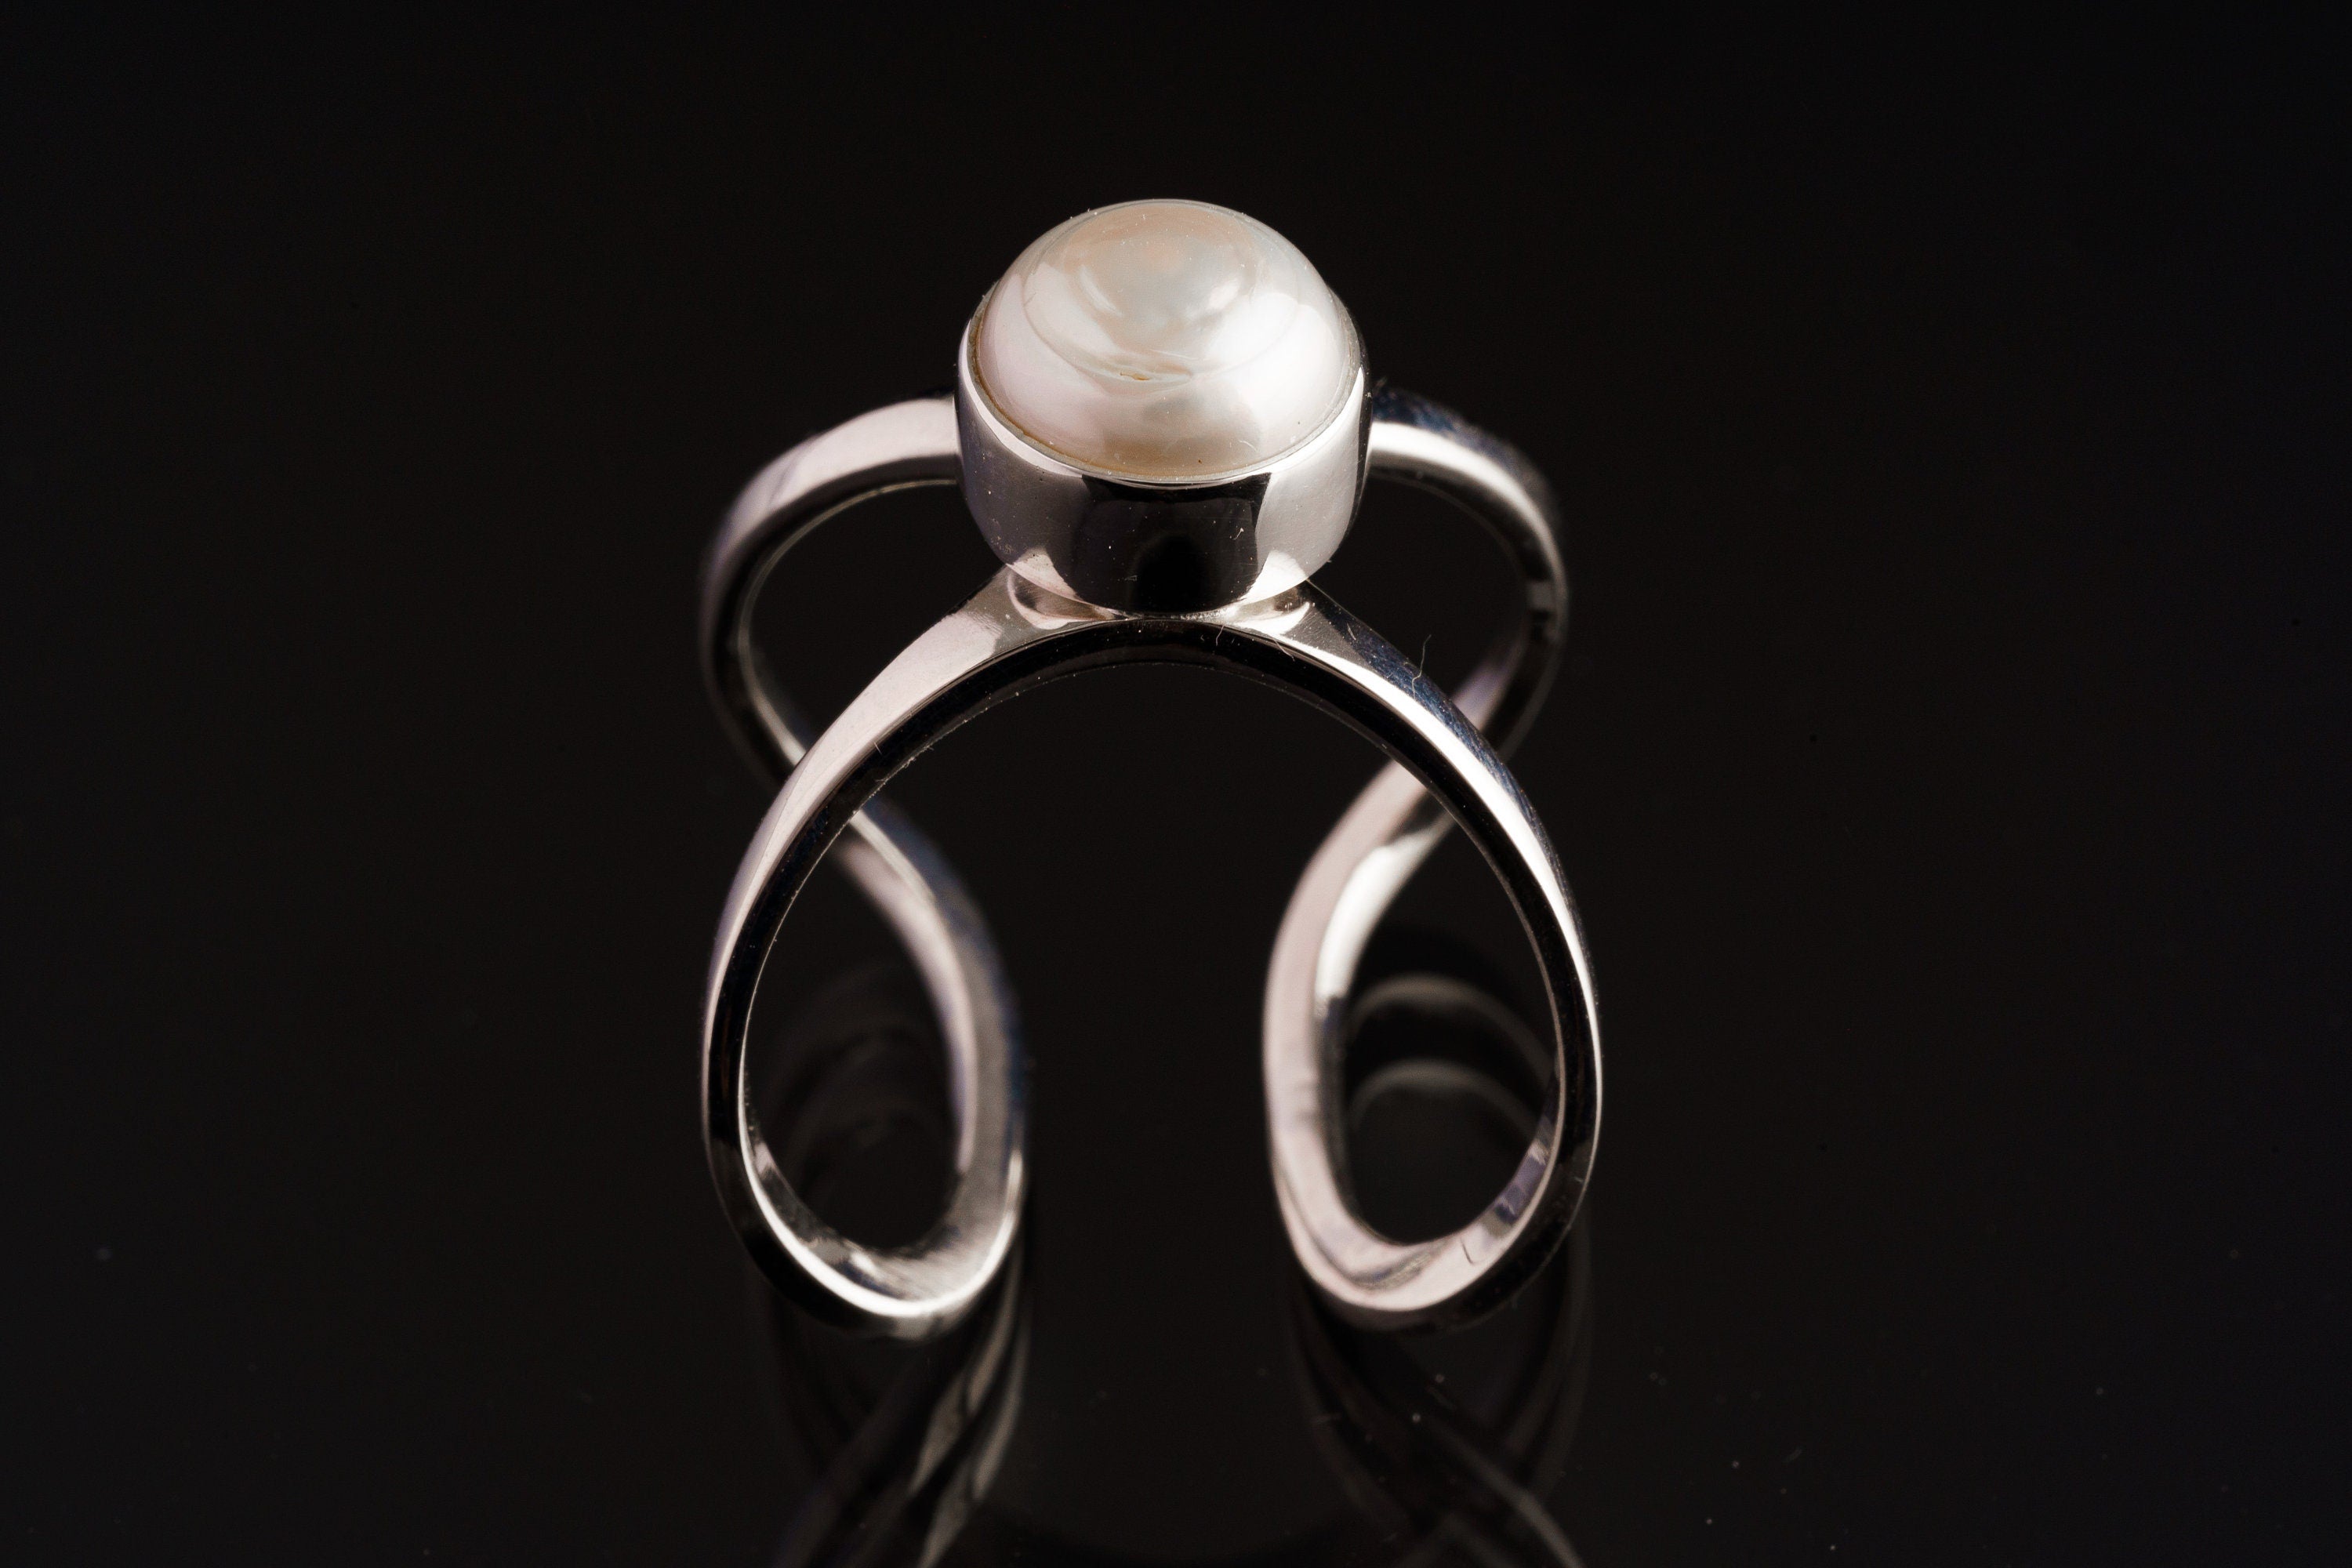 Big Round South Sea Pearl - 925 Sterling Silver - Butterfly Adjustable Cast Ring - Polished finish - Size 5-9 US